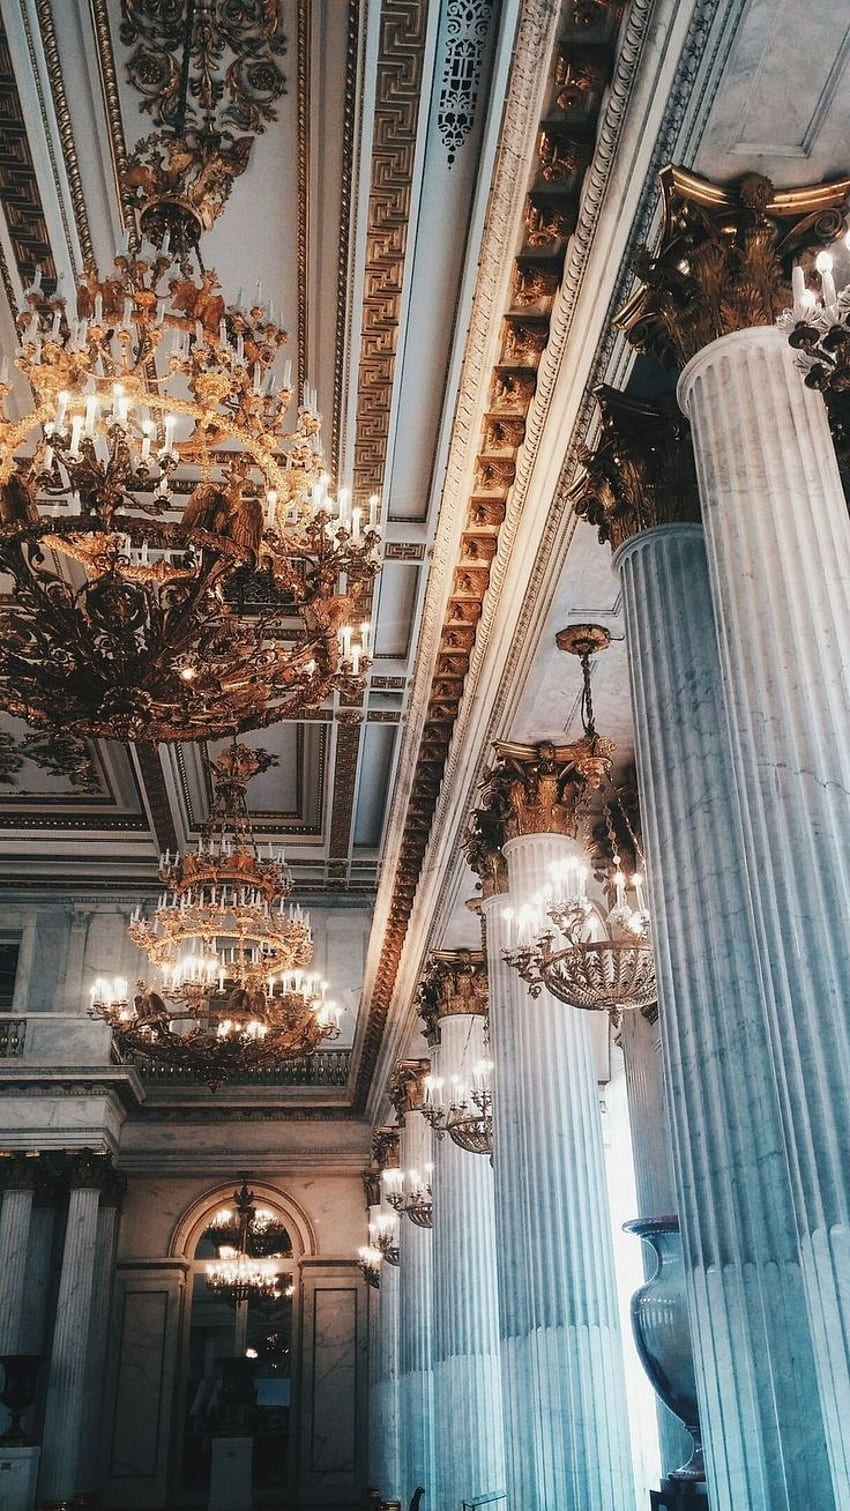 The ceiling is decorated with ornate gold chandeliers. - Architecture